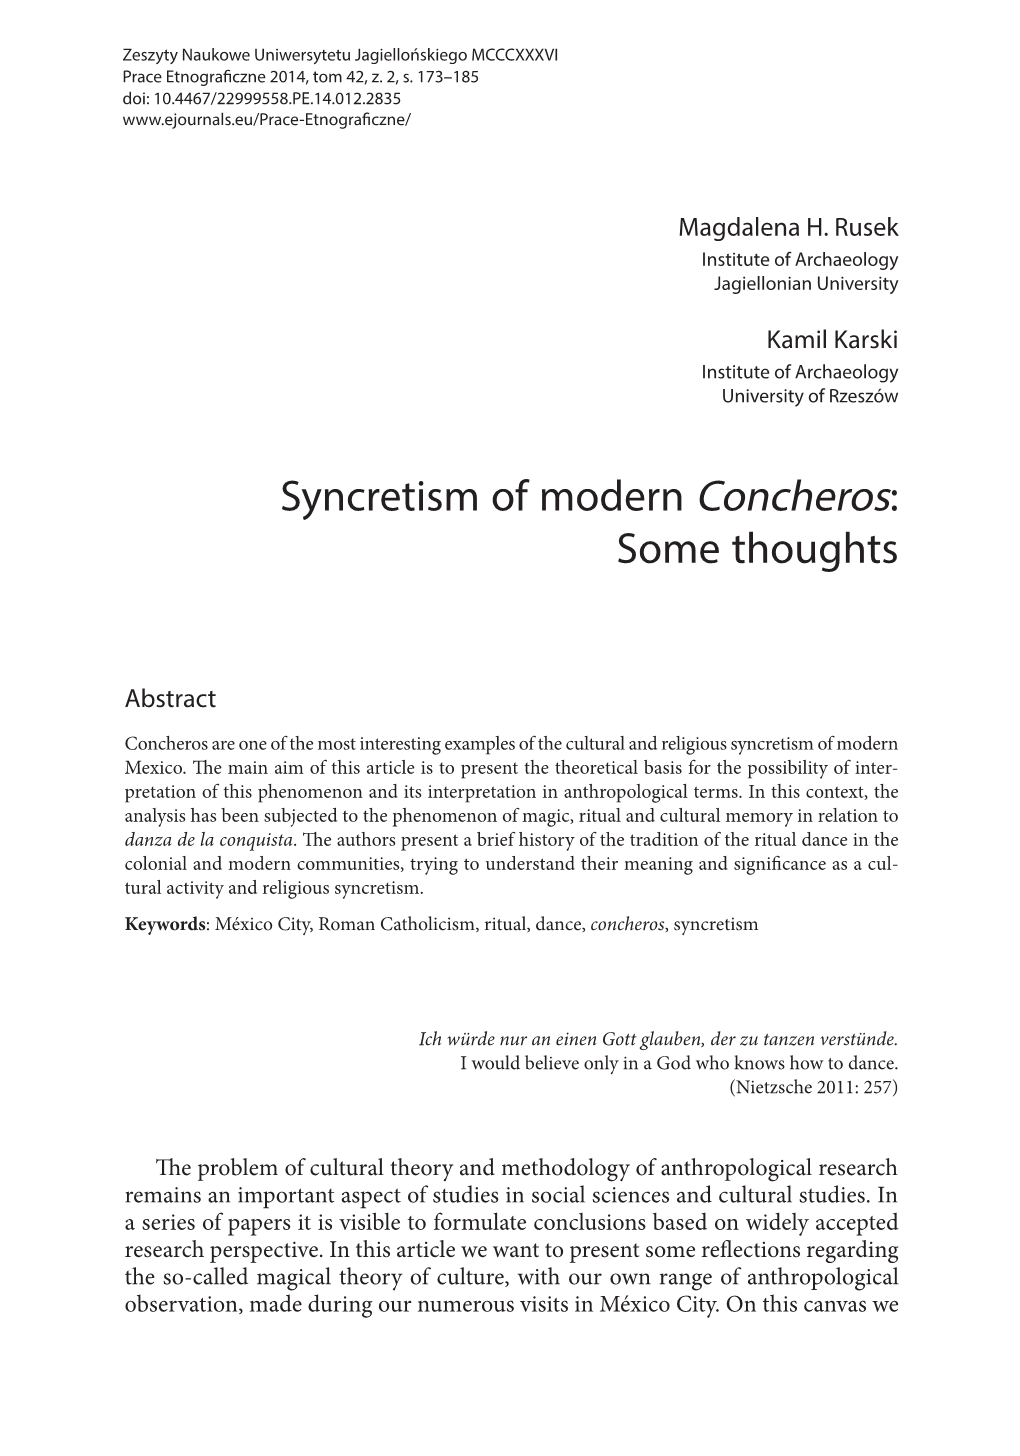 Syncretism of Modern Concheros: Some Thoughts